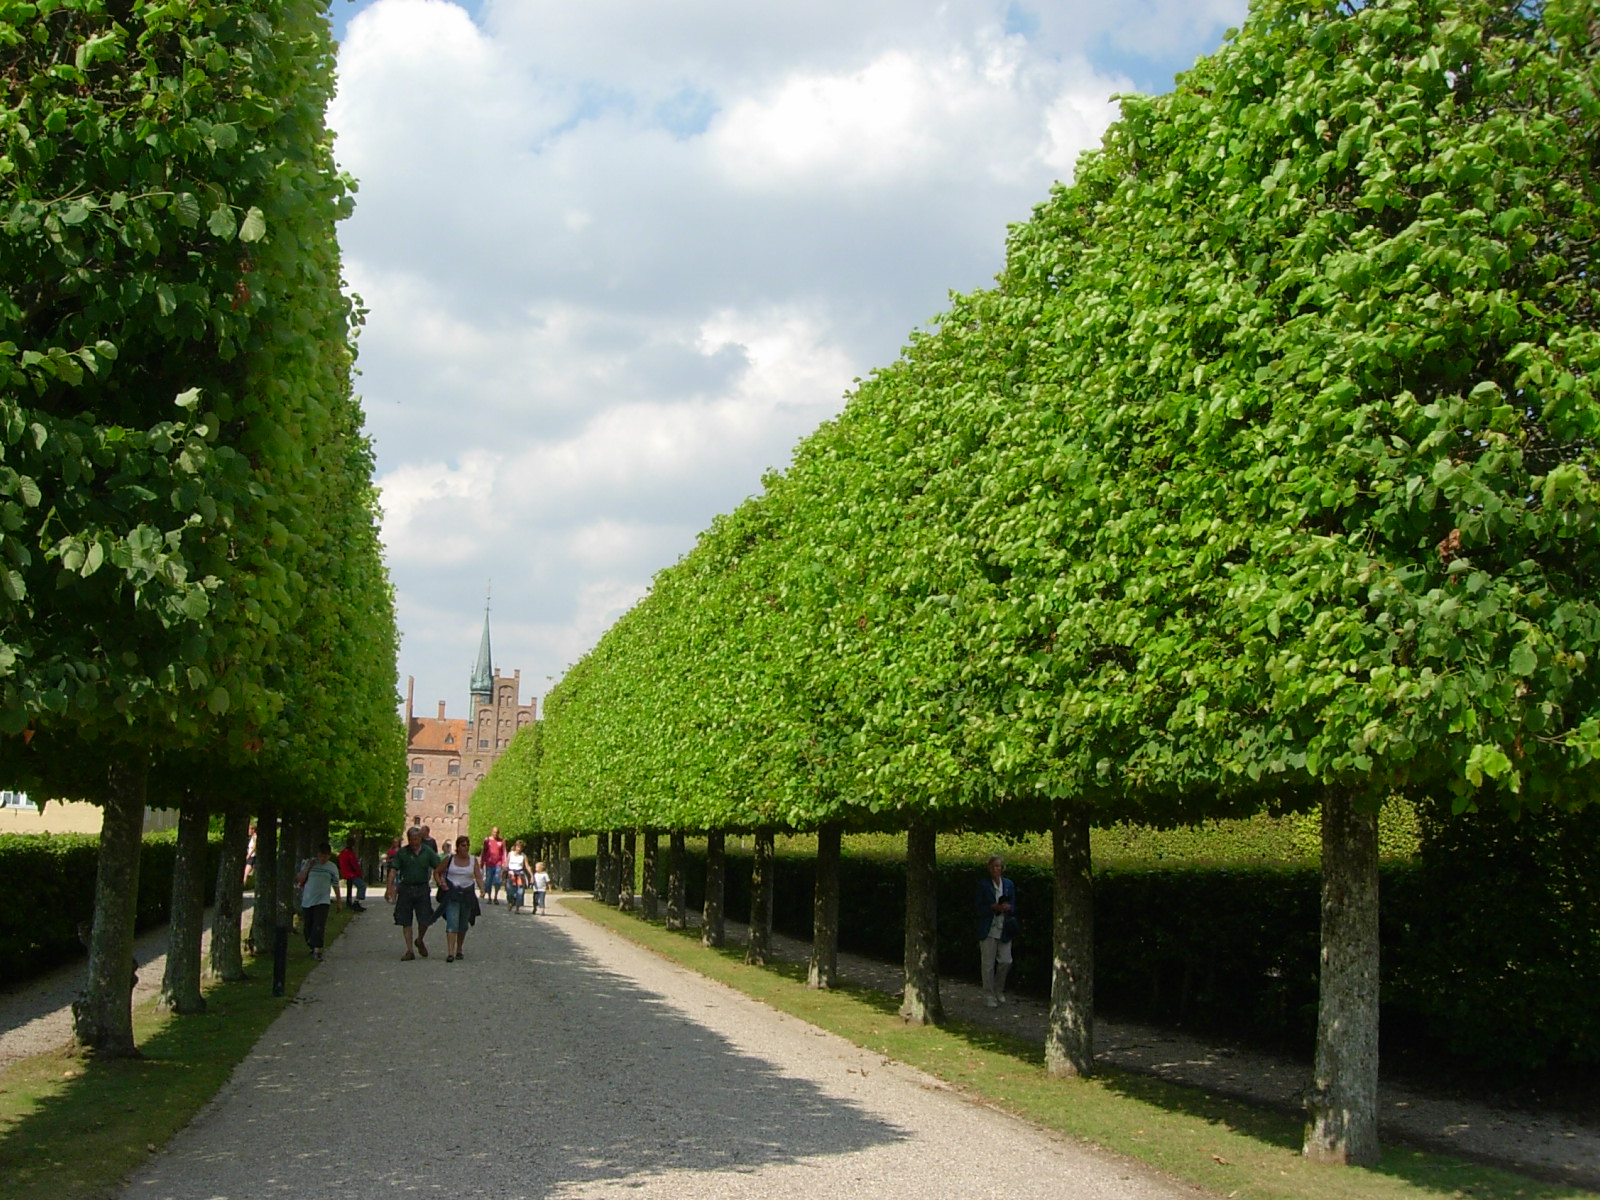 Rows of pruned trees